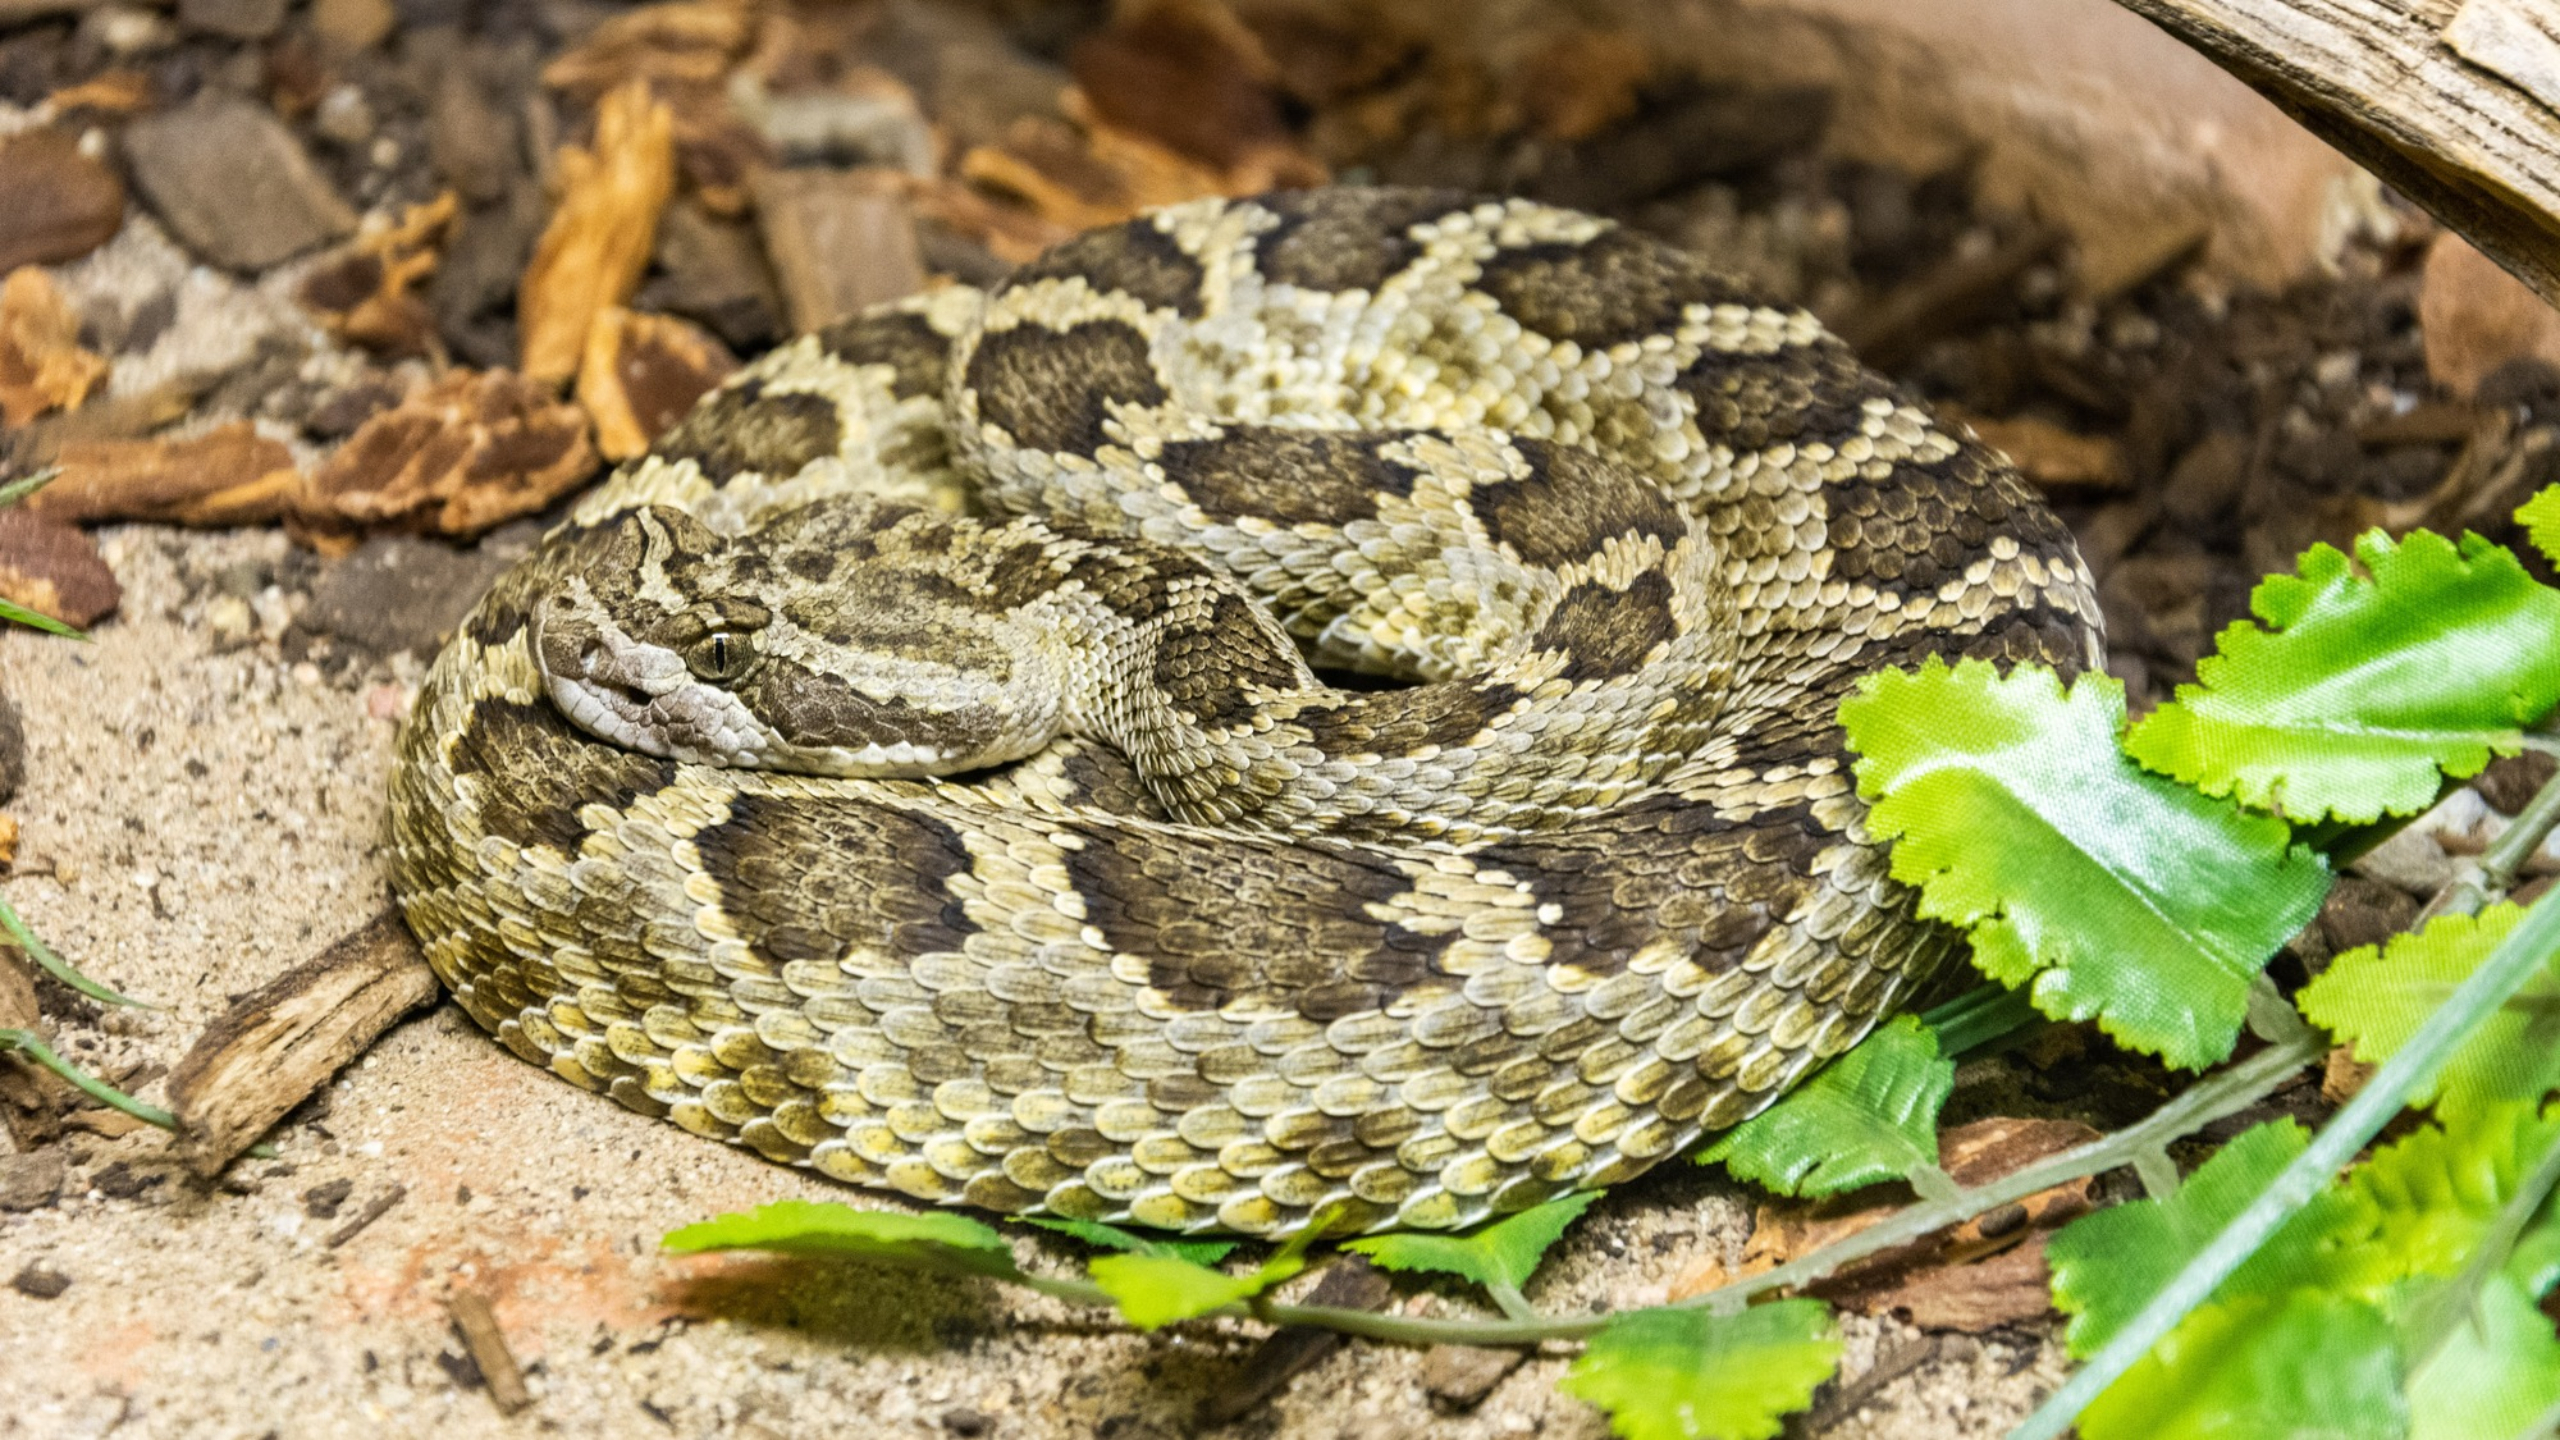 Stressed rattlesnakes just need a little help from their friends